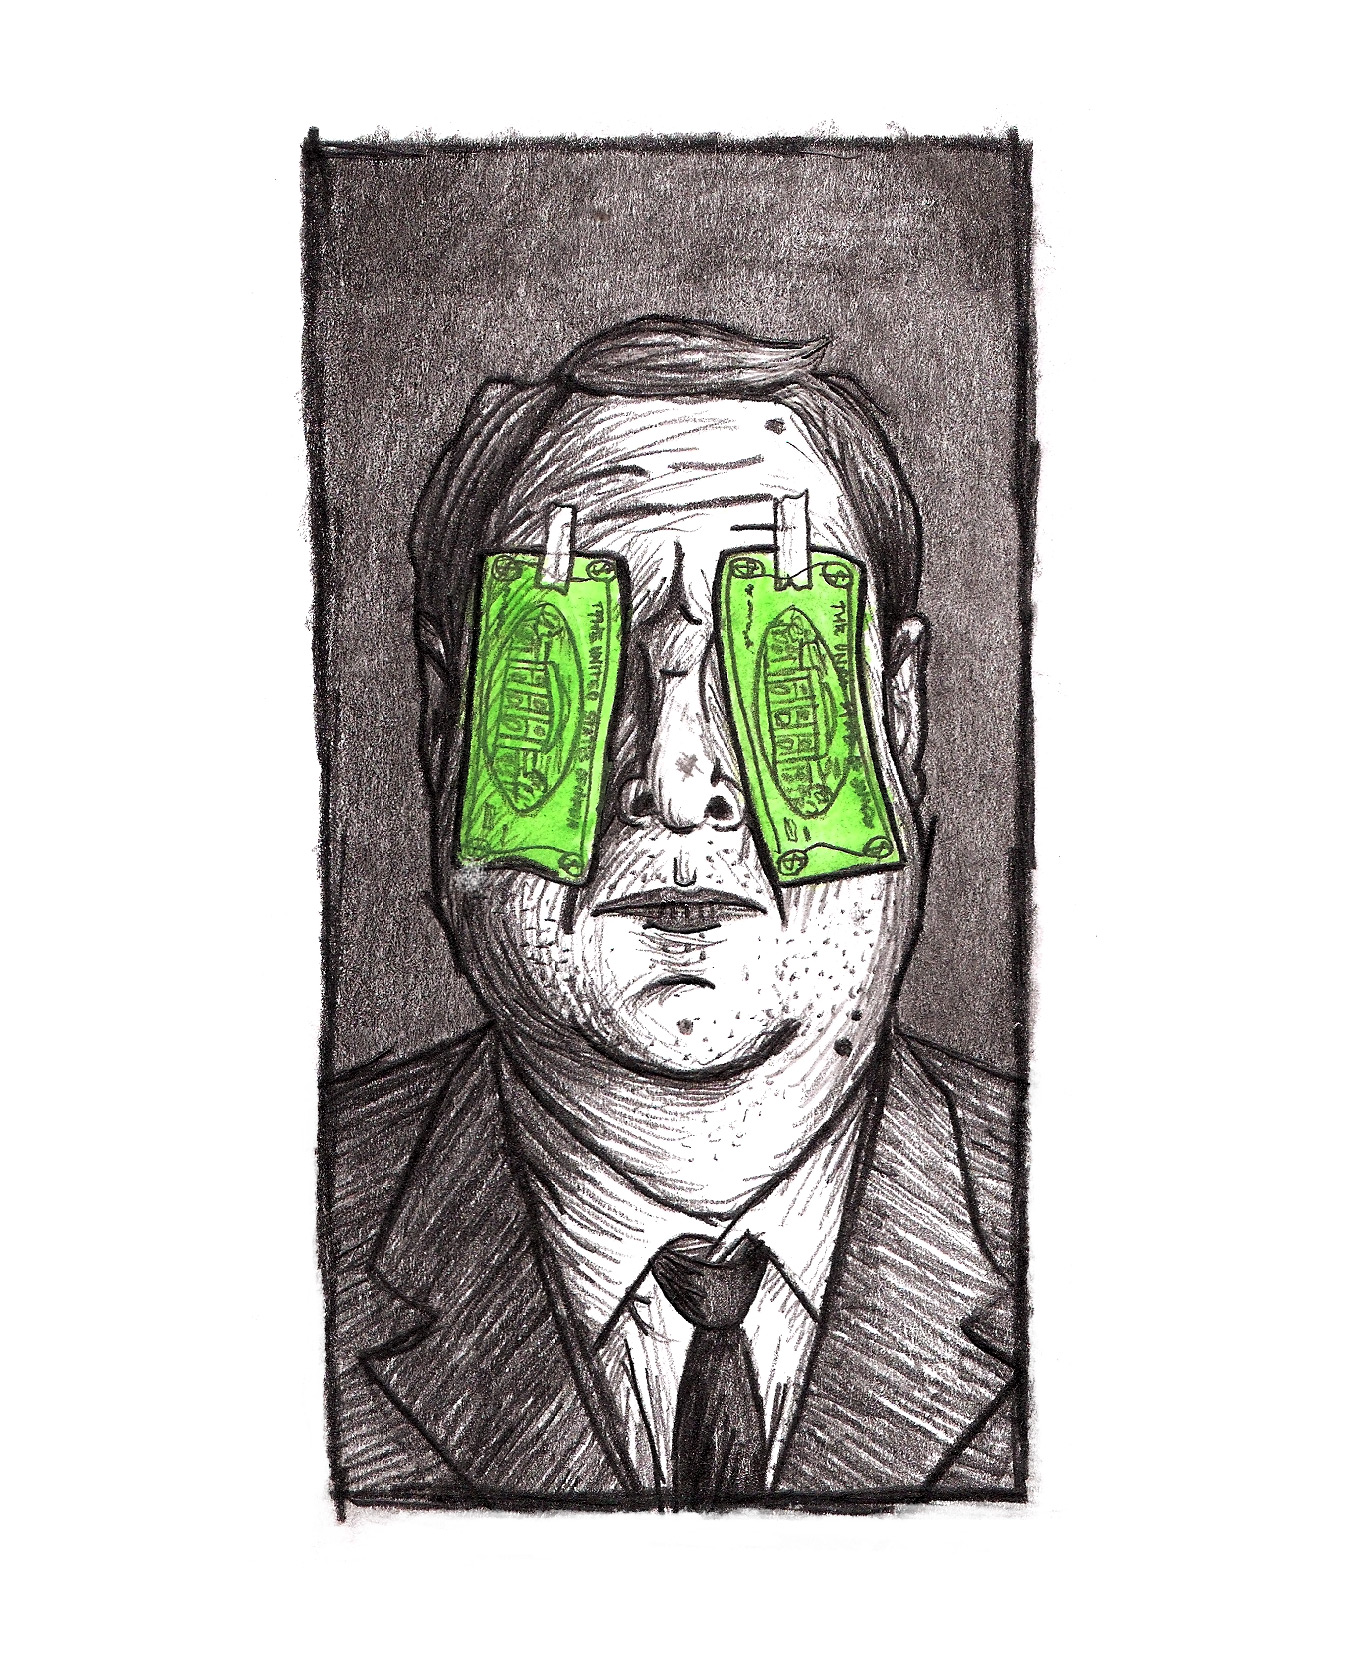 Illustration of man with money covering his eyes - Greed is Blinding